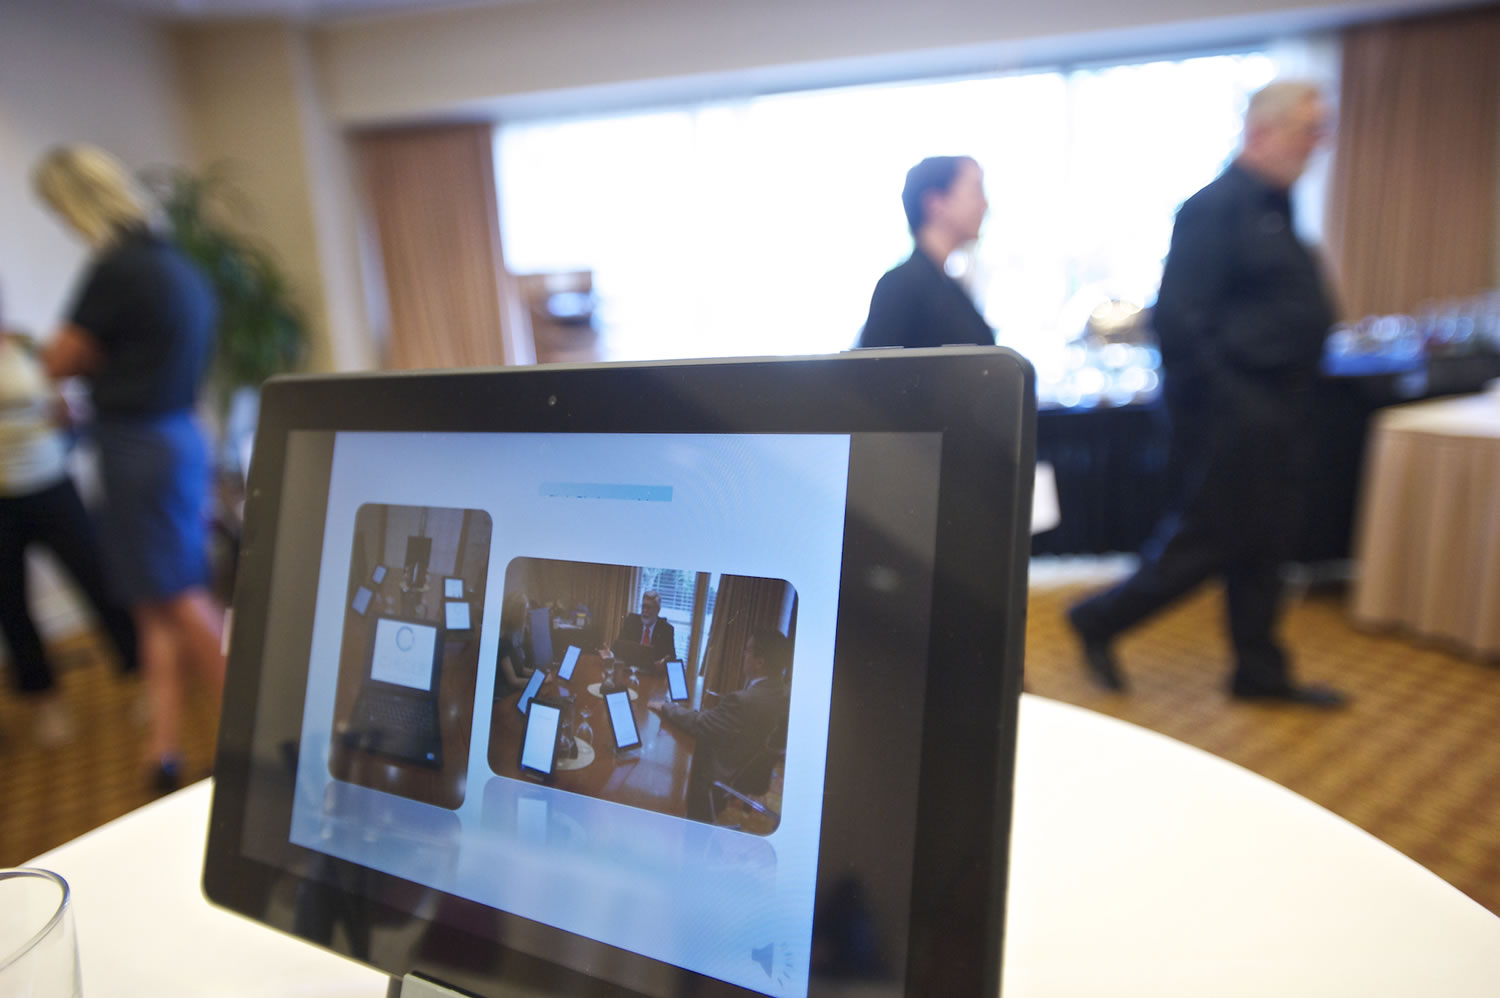 Circle Technology, a Vancouver company that's developed an offline wireless system for presentations, displayed its new products Wednesday at the Hilton Vancouver Washington.